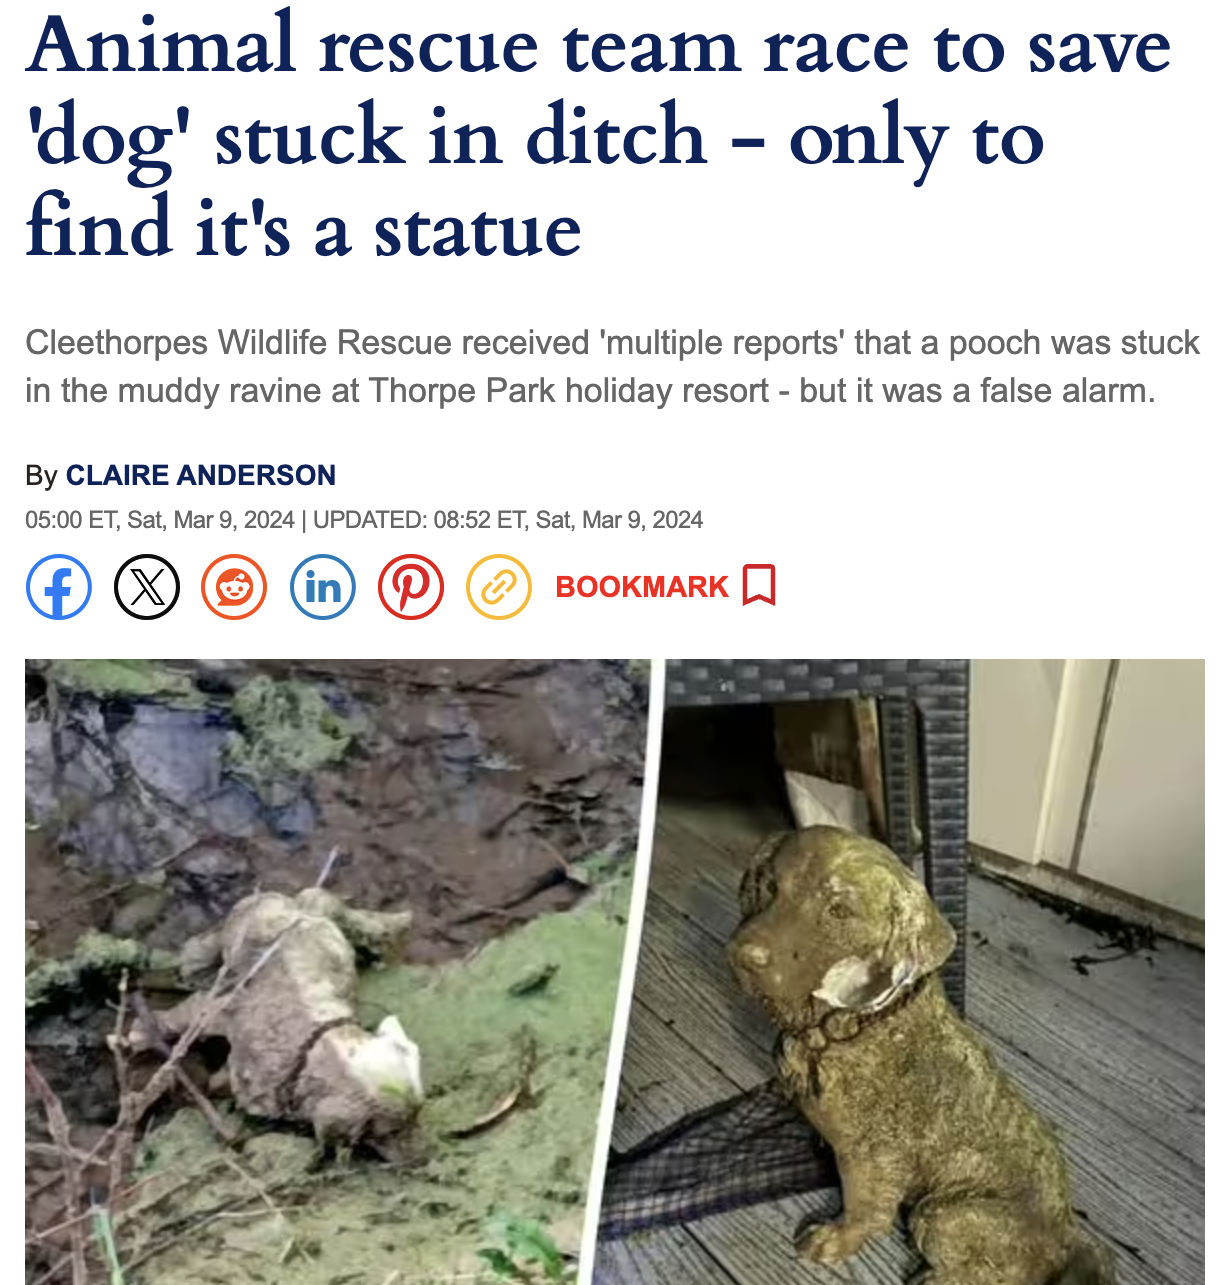 fauna - Animal rescue team race to save 'dog' stuck in ditch only to find it's a statue Cleethorpes Wildlife Rescue received 'multiple reports' that a pooch was stuck in the muddy ravine at Thorpe Park holiday resort but it was a false alarm. By Claire An